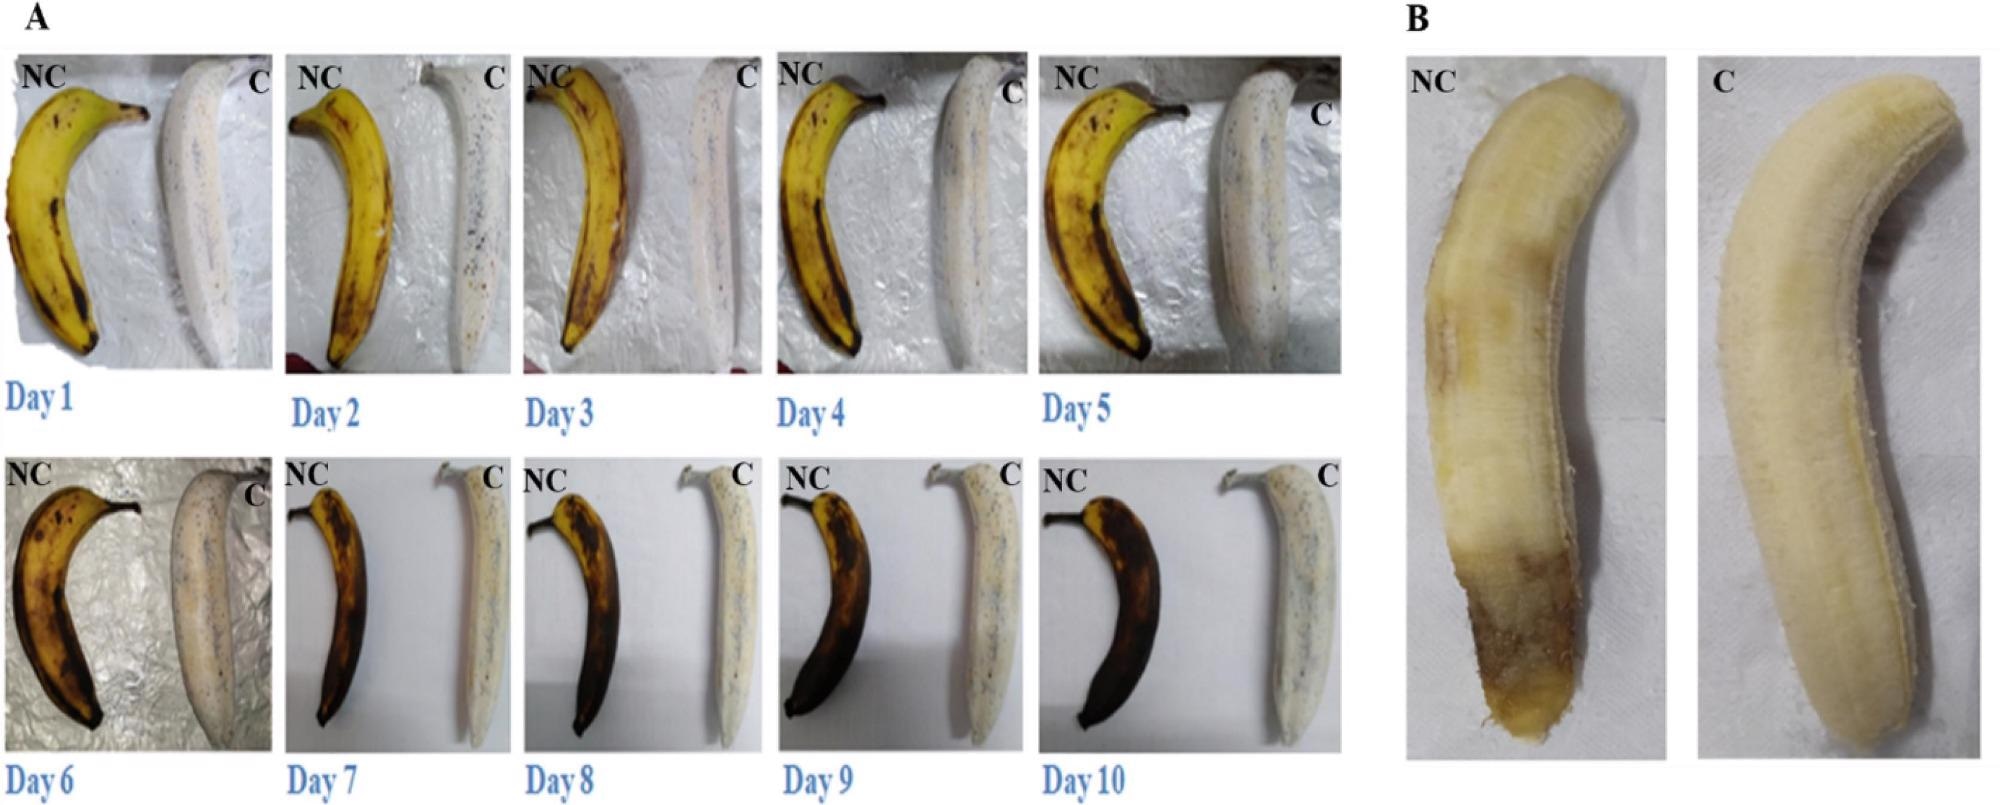 (A) Time-lapse photography of silk fibroin composite nanofiber coated banana (150 min total electrospinning time by changing the position of banana to allow the proper coating from all sides) and uncoated banana. (B) Banana without peel on 6th day; Note: NC– non-coated, C- coated.